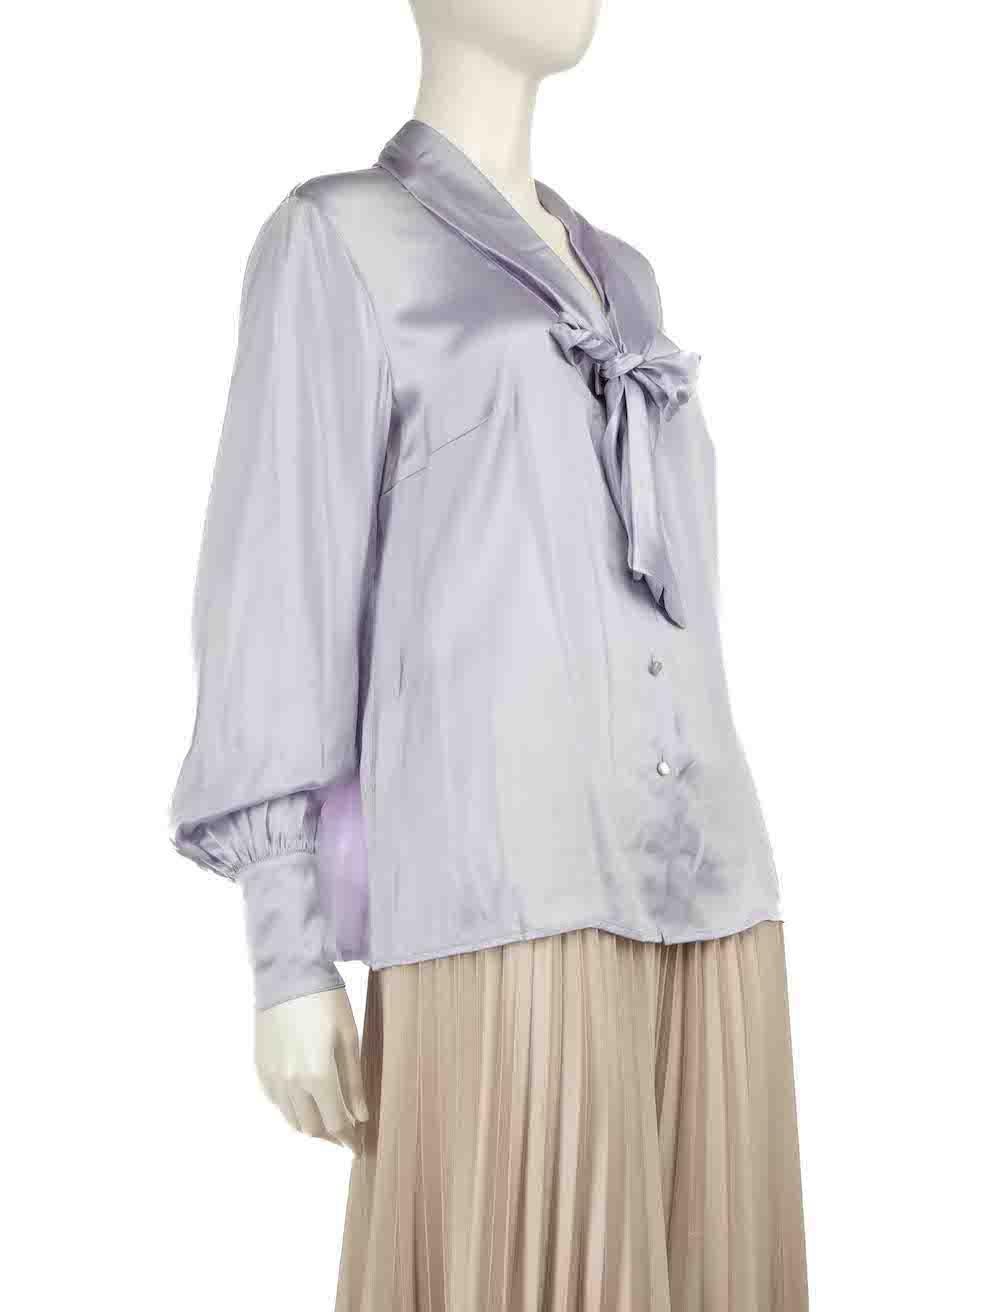 CONDITION is Never worn, with tags. No visible wear to the blouse is evident on this new Escada designer resale item.
 
 
 
 Details
 
 
 Lilac
 
 Silk
 
 Blouse
 
 Long sleeves
 
 Buttoned cuffs
 
 V-neck
 
 Neck tie detail
 
 Button up fastening
